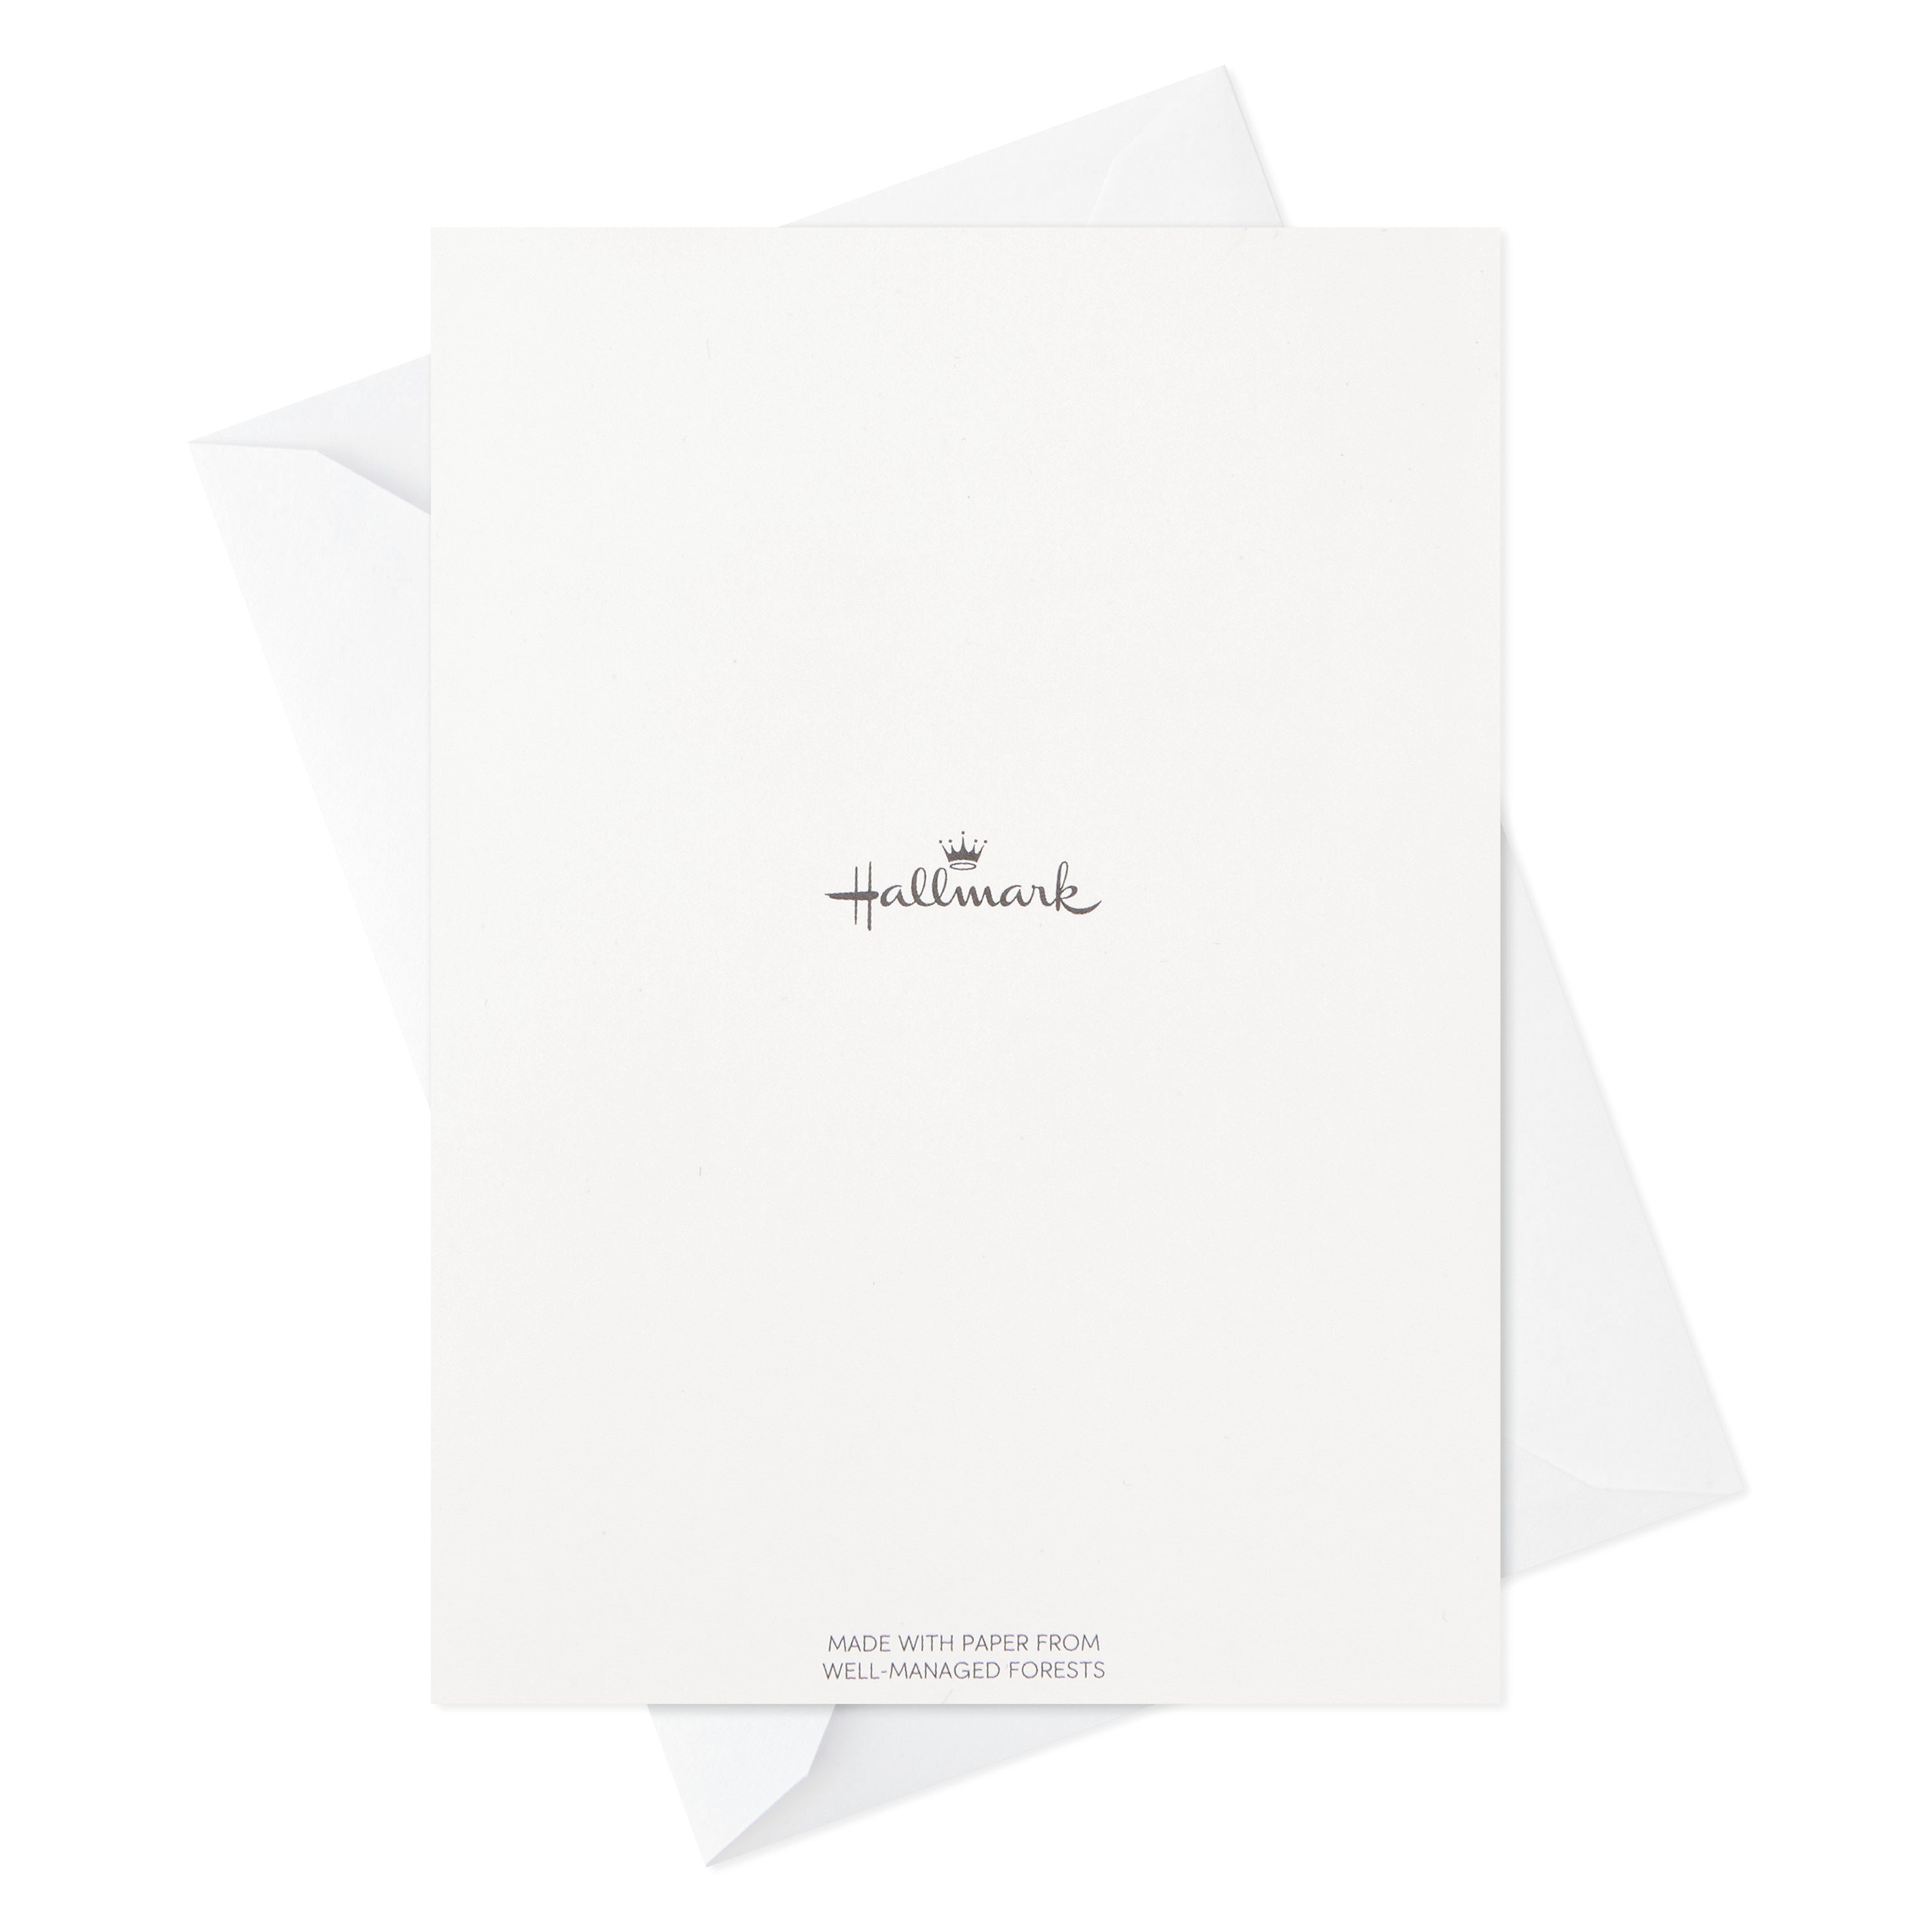 Blank Cards Assortment, Nature Prints (48 Cards with Envelopes)